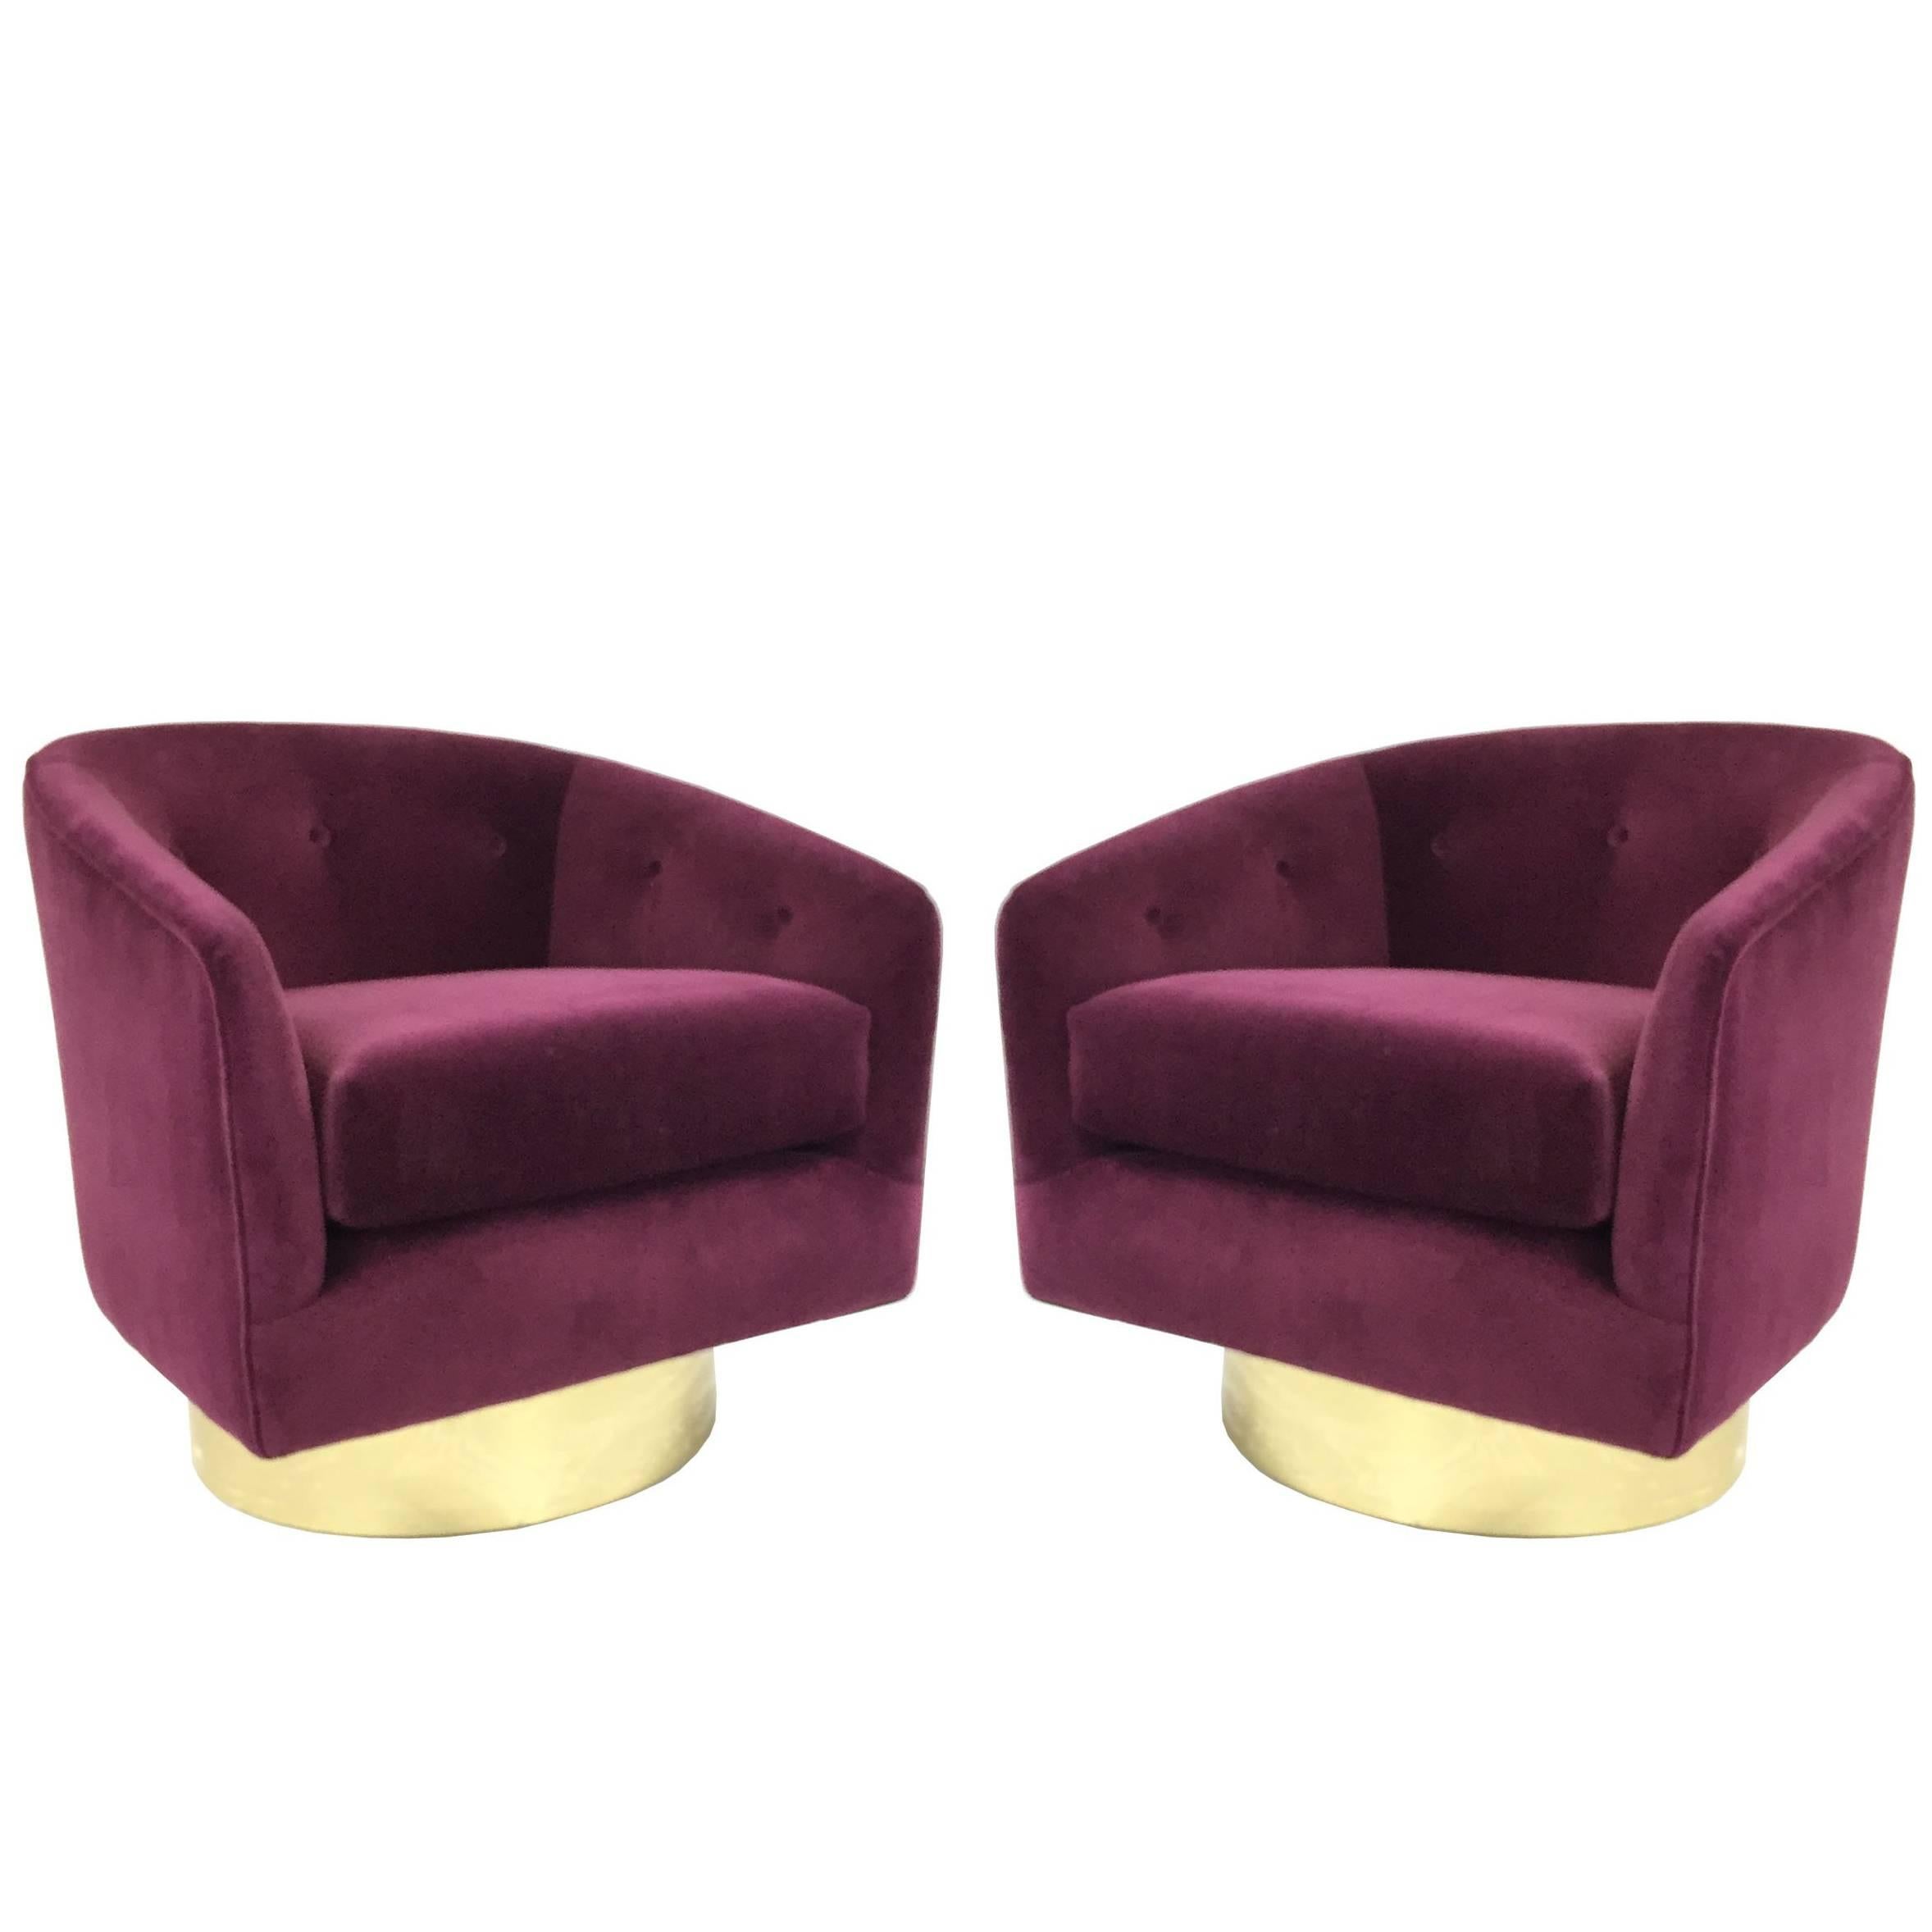 Pair of Newly Upholstered Velvet Milo Baughman Swivel Chairs with Brass Plinths